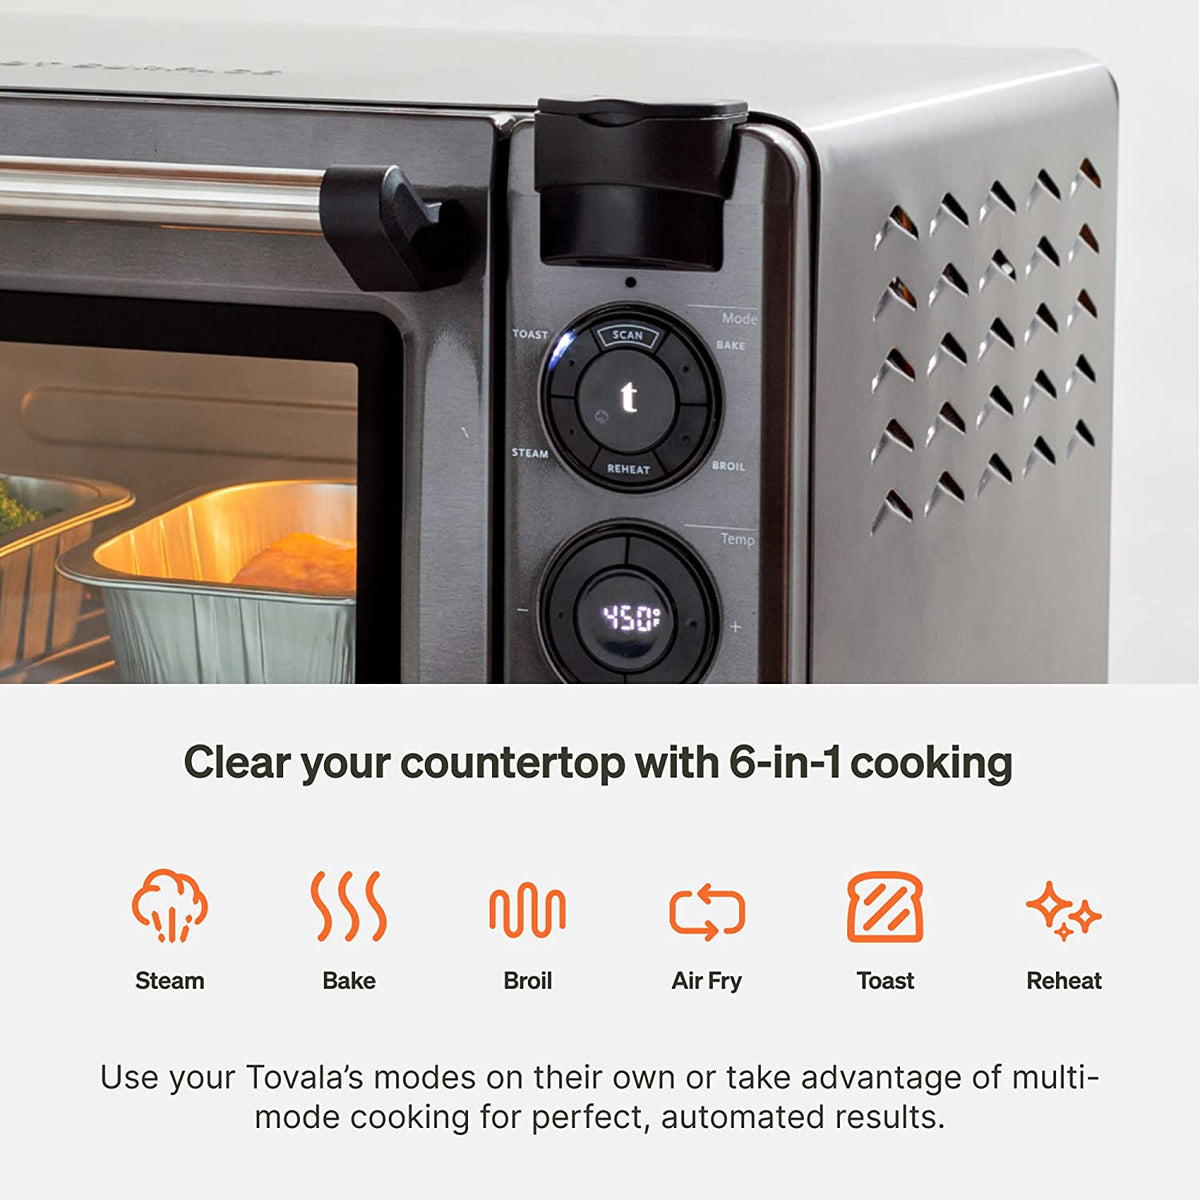 Tovala Smart Oven, 5-in-1 Air Fryer Oven Combo - Air Fry, Bake, Bake &  Reheat - Smartphone Console Face Convection - AliExpress